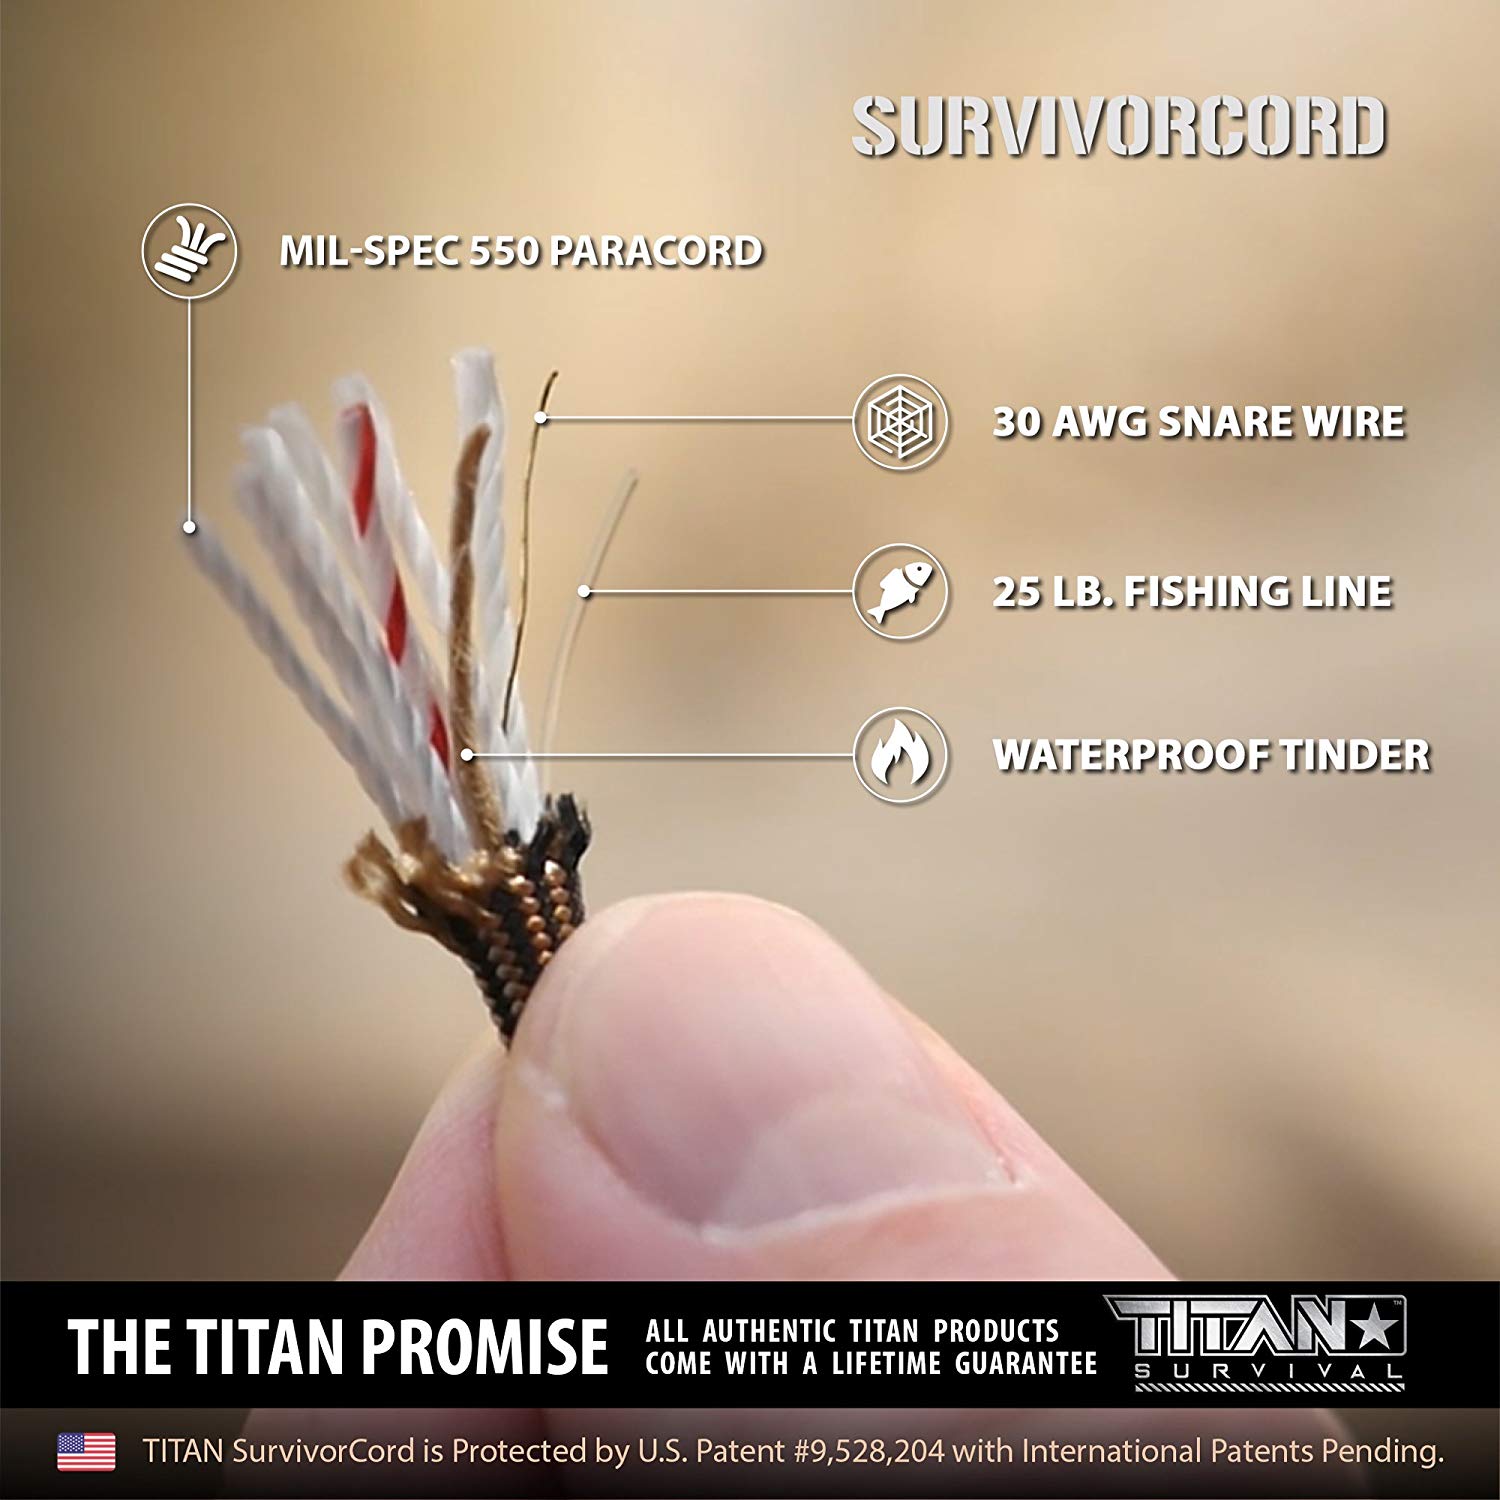 Titan 620 LB SurvivorCord Paracord | Authentic Patented U.S. Military Type III Nylon 550 Parachute Cord (MIL-C-5040H) with Integrated Fishing Line, Fire-Starter Tinder, and Snare Wire